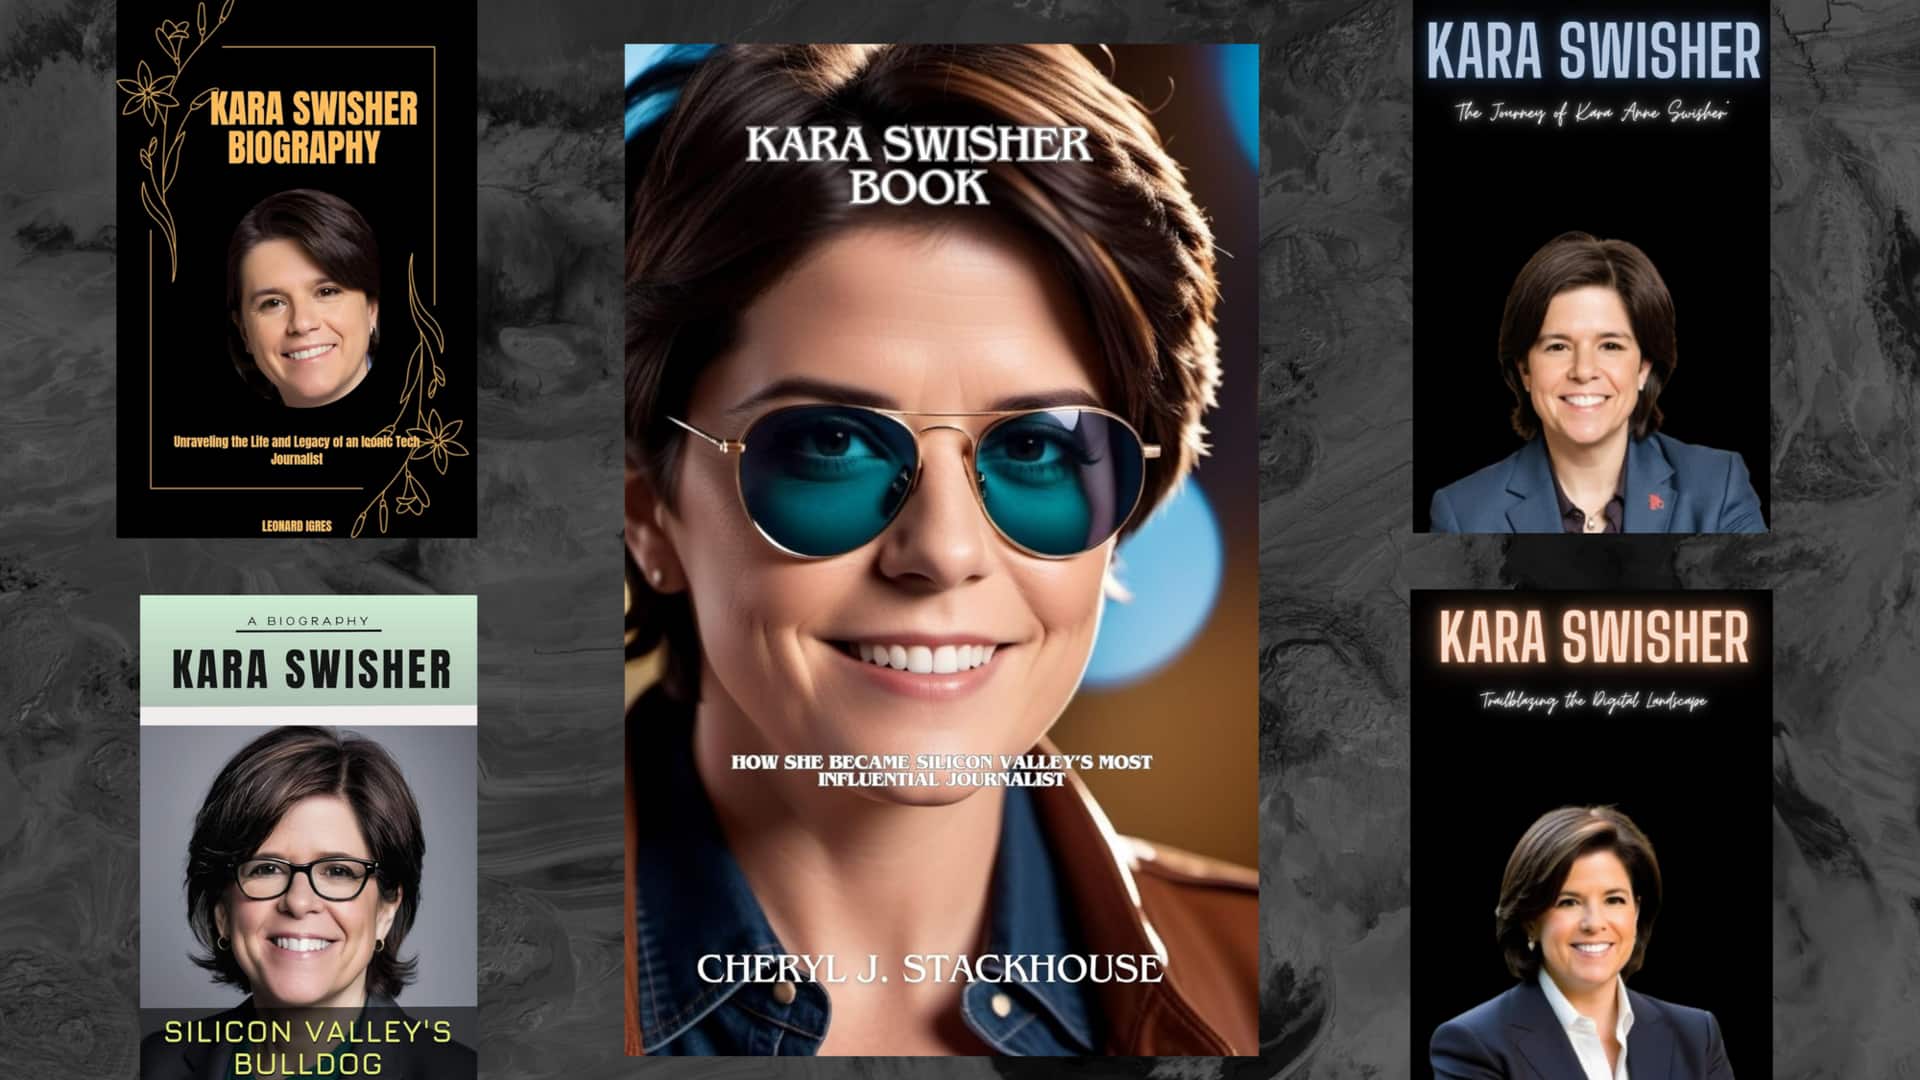 Amazon filled with AI-generated ripoffs of Kara Swisher's biography